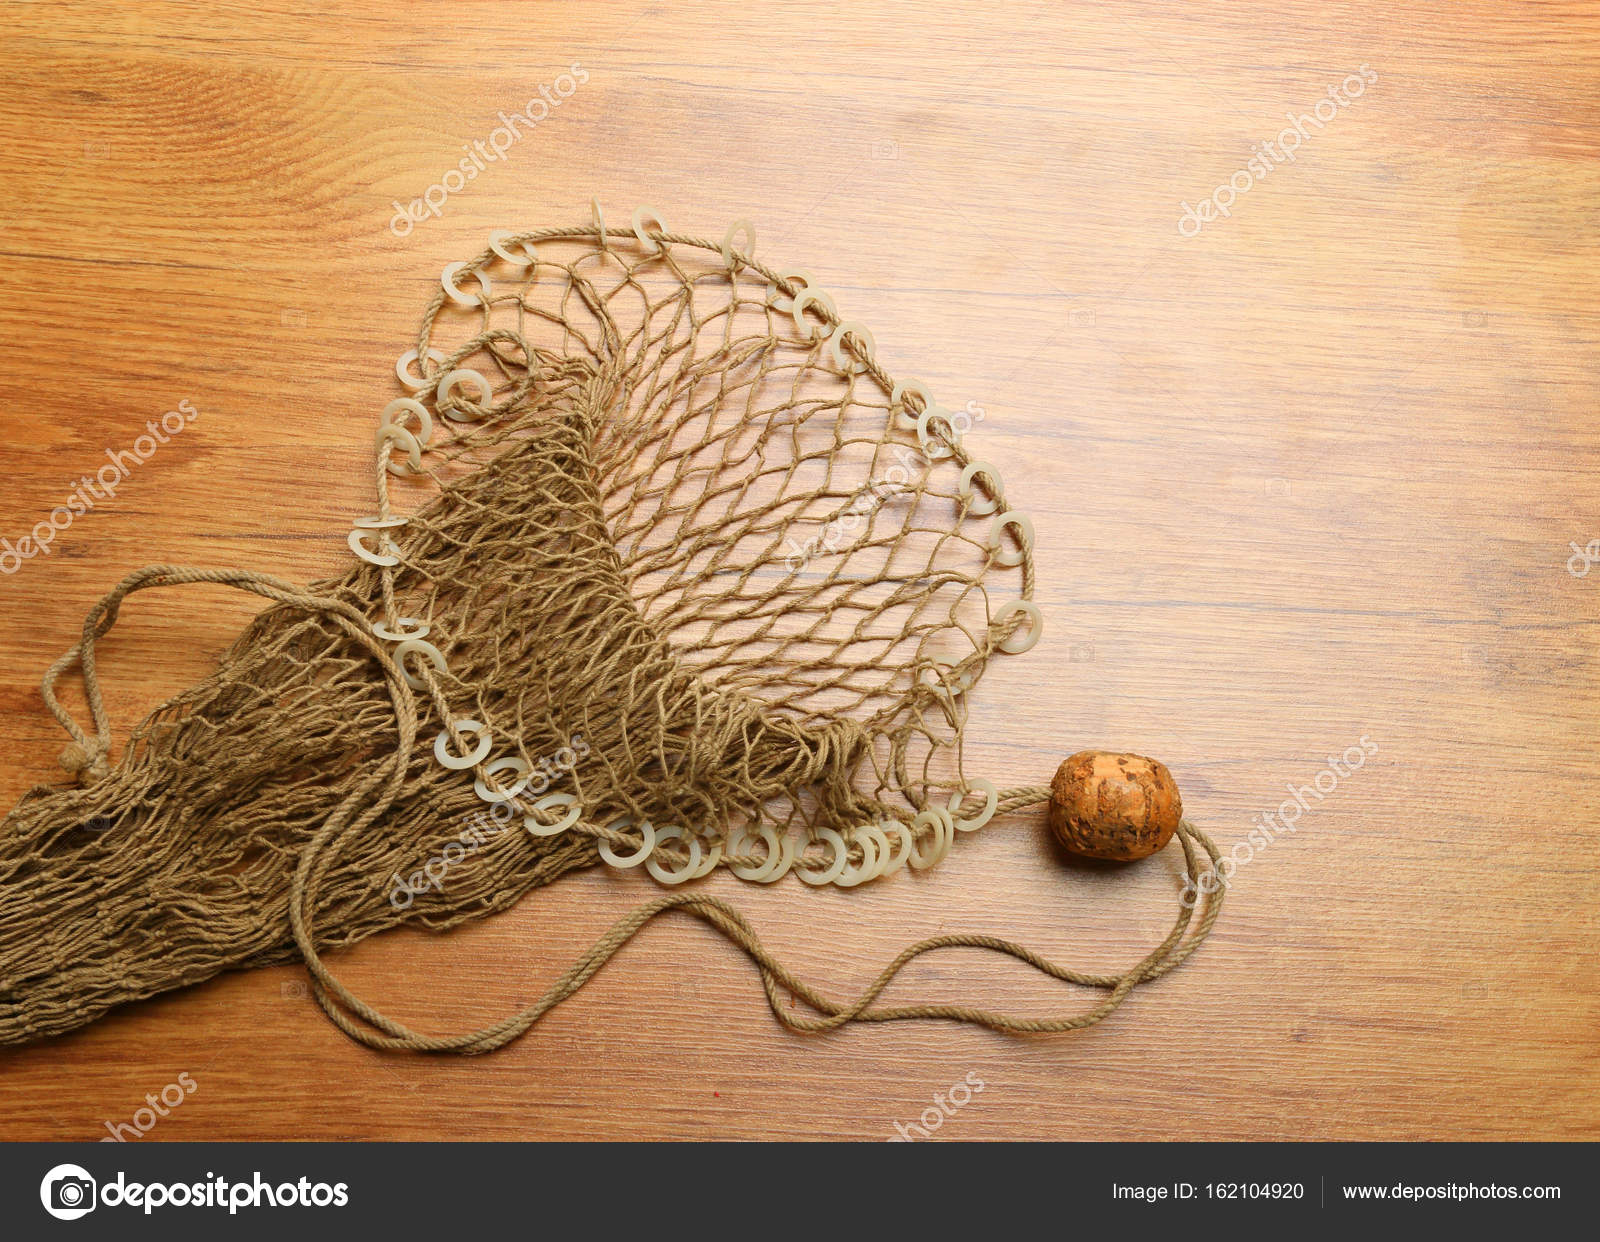 Fishing net with cork buoy on wooden plate Stock Photo by